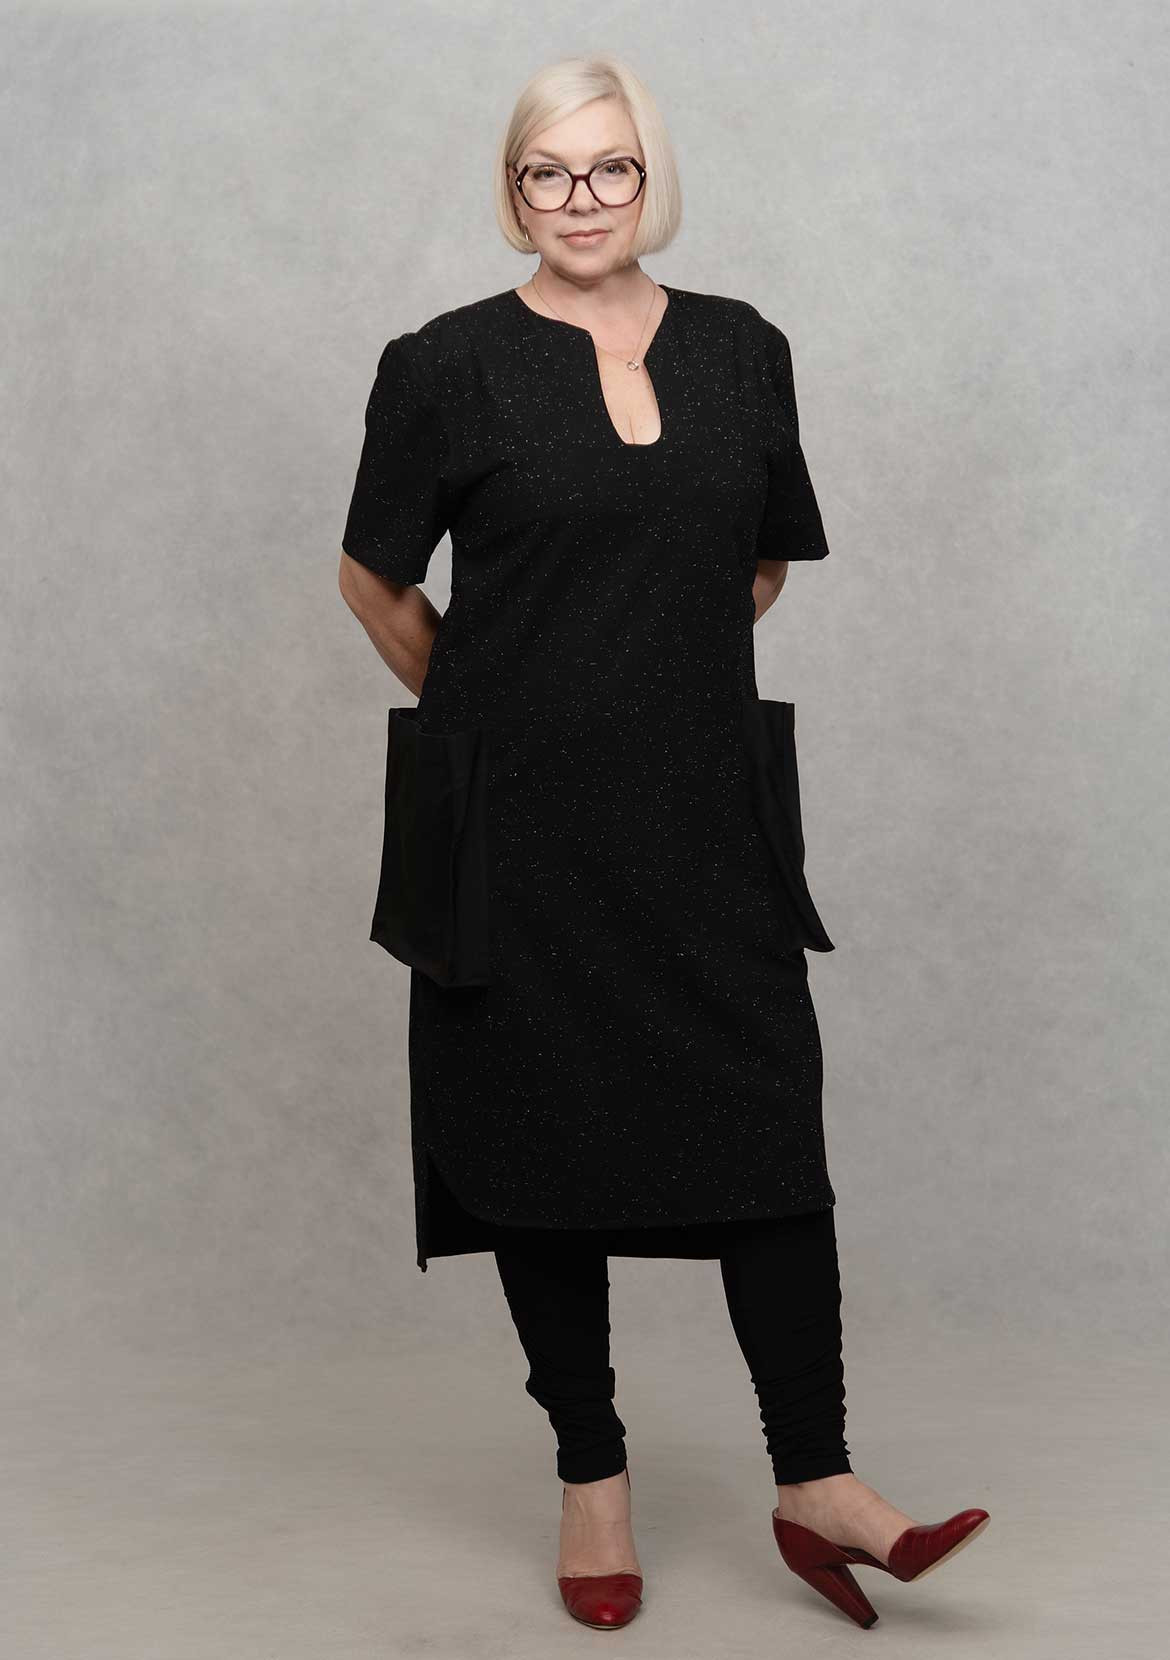 Christine McKanna-Farr of designmilkstudio stands, wearing a black dress and red heels in front of a grey background.